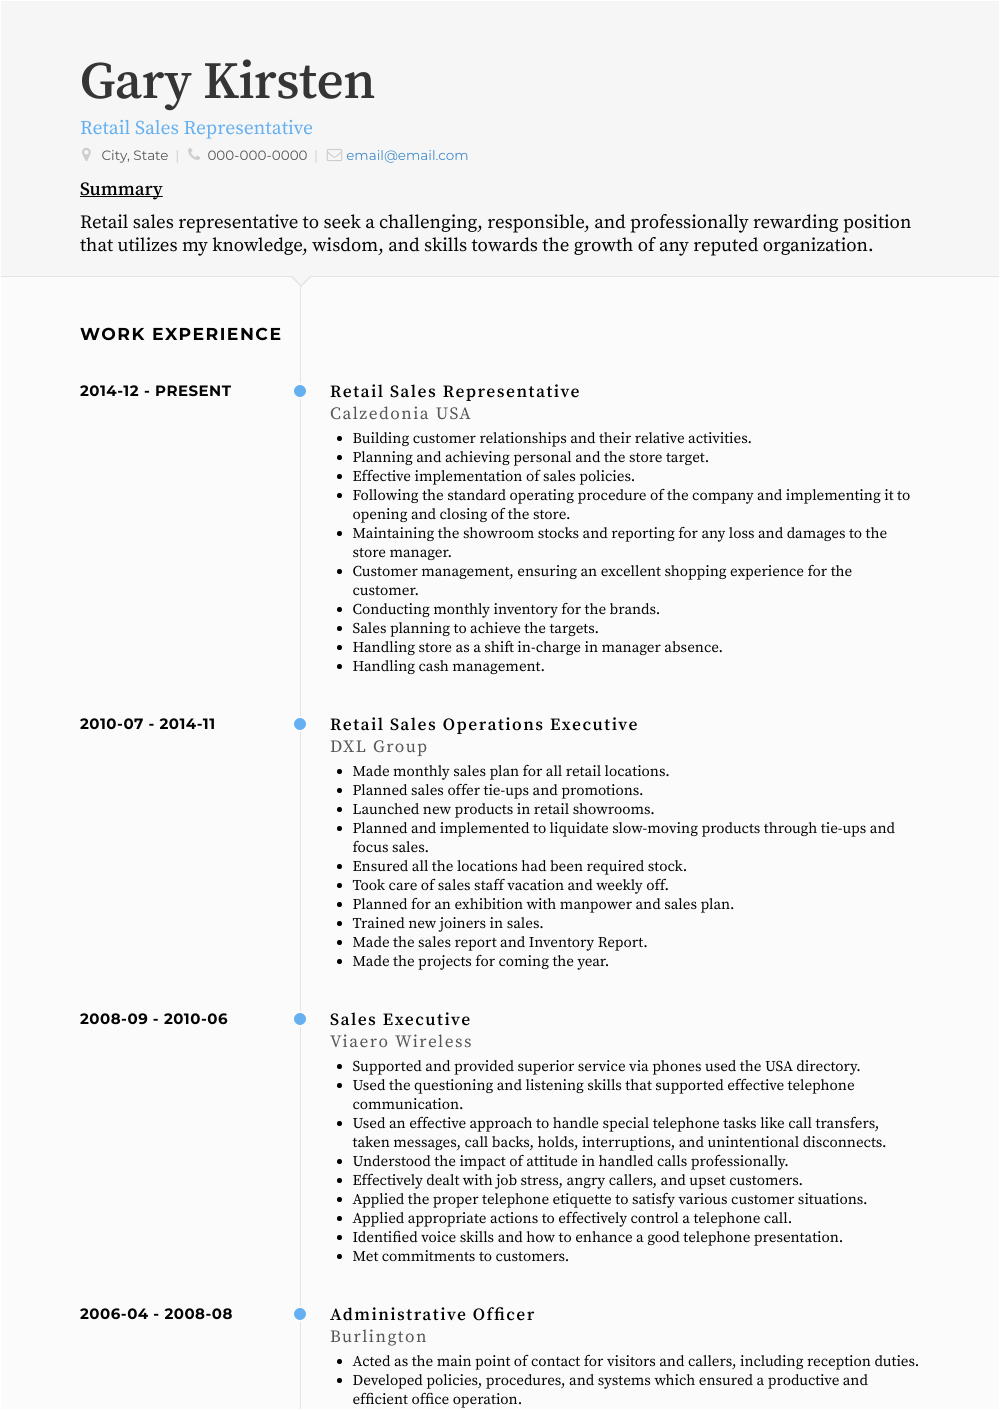 Resume Sample for Retail Sales Job Retail Sales Resume Samples and Templates